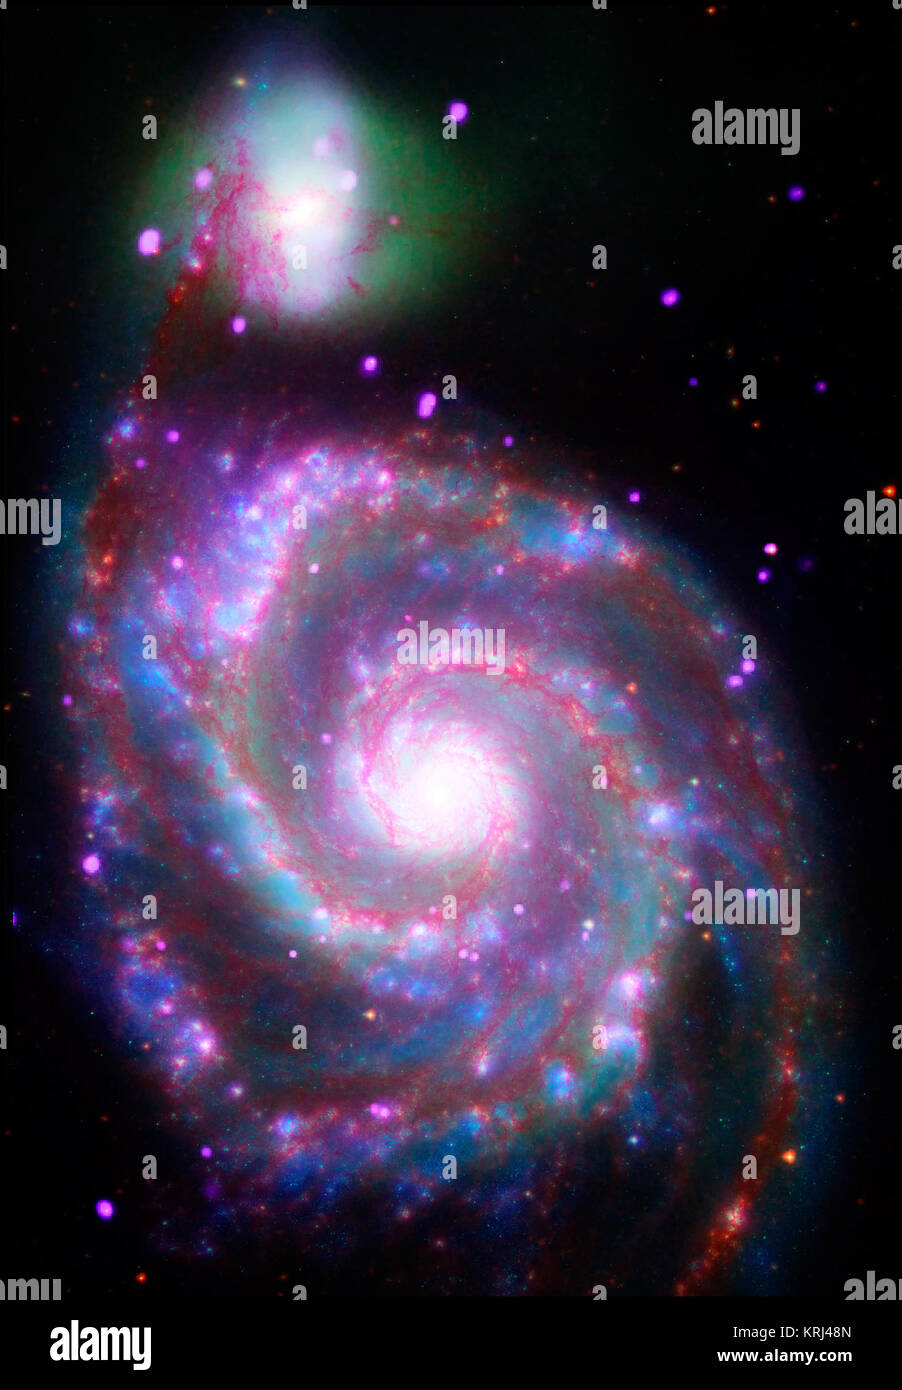 M51, whose name comes from being the 51st entry in Charles Messier's catalog, is considered to be one of the classic examples of a spiral galaxy. At a distance of about 30 million light years from Earth, it is also one of the brightest spirals in the night sky. A composite image of M51, also known as the Whirlpool Galaxy, shows the majesty of its structure in a dramatic new way through several of NASA's orbiting observatories. X-ray data from NASA's Chandra X-ray Observatory reveals point-like sources (purple) that are black holes and neutron stars in binary star systems. Chandra also detects  Stock Photo